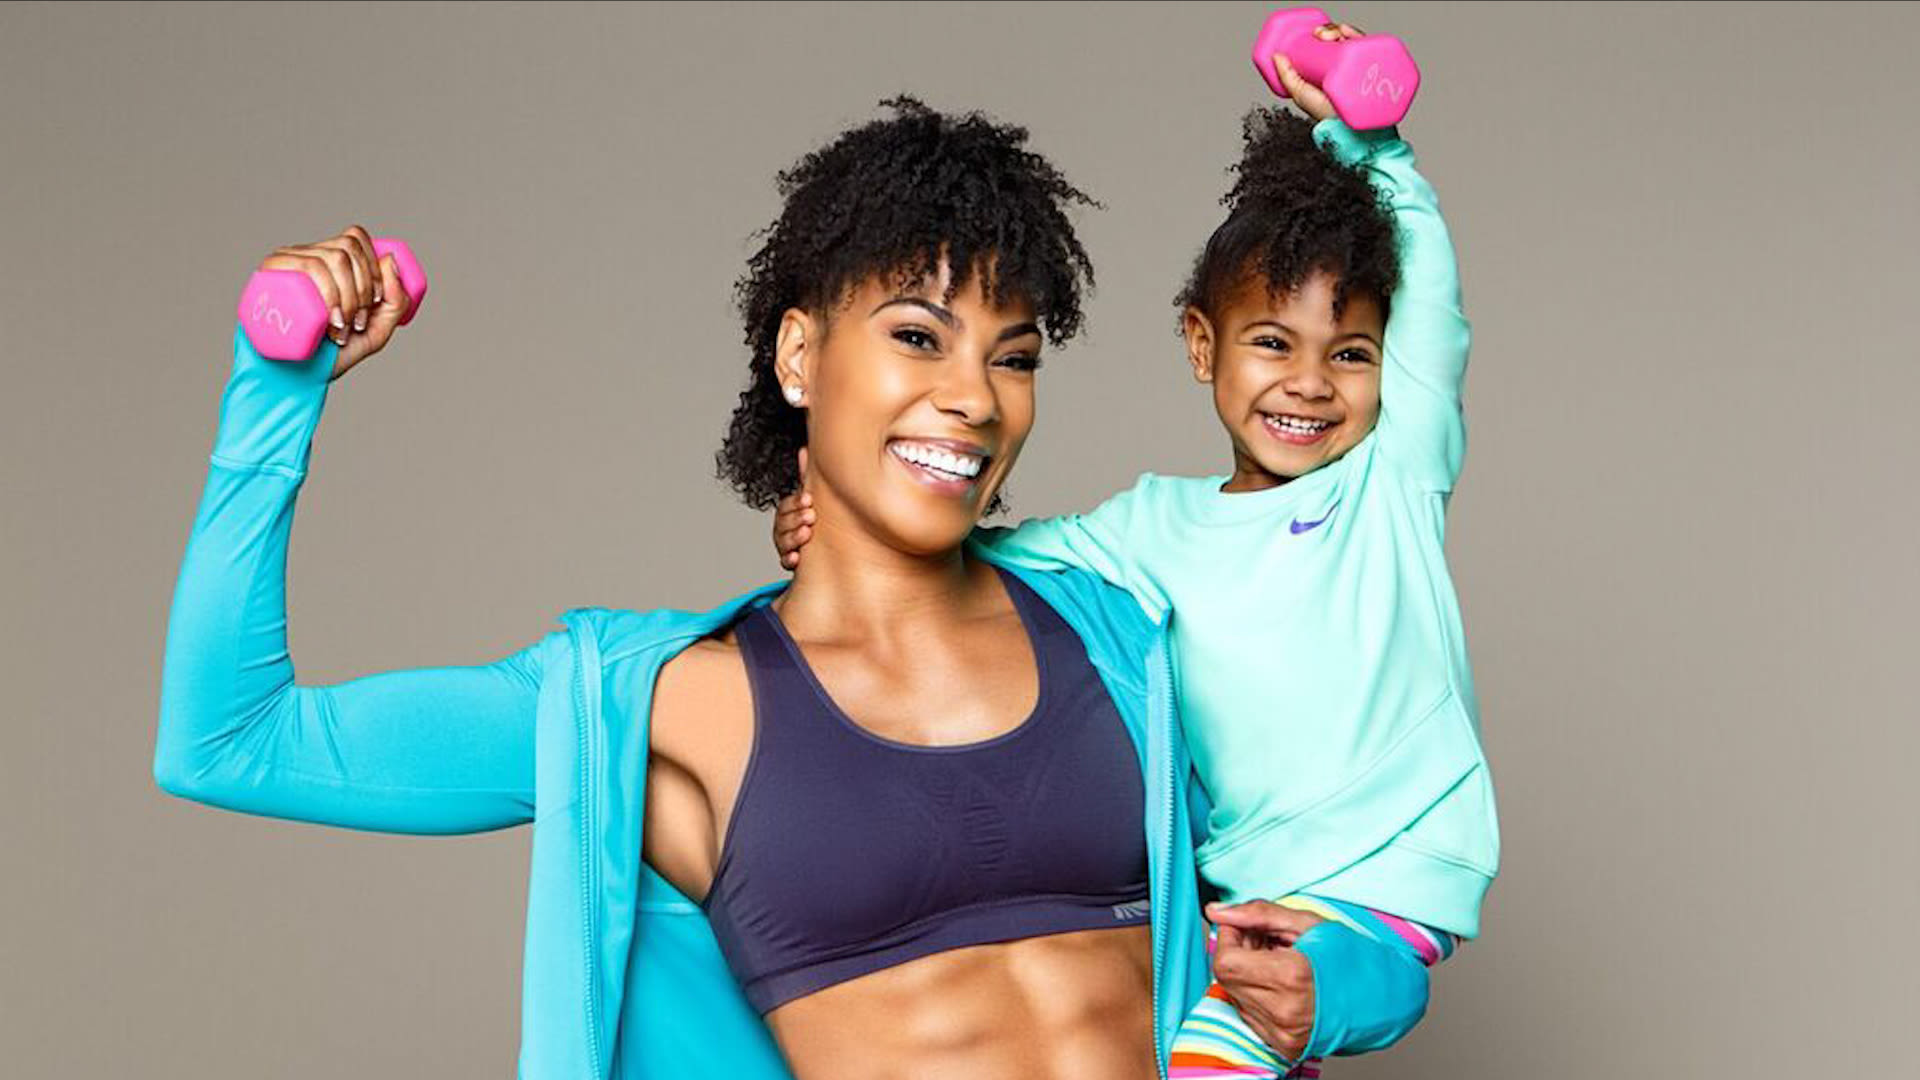 vrede echtgenoot Kinderen Watch This Fit Mom Works Out With Her Toddler Daughter To Stay In Shape |  SELF